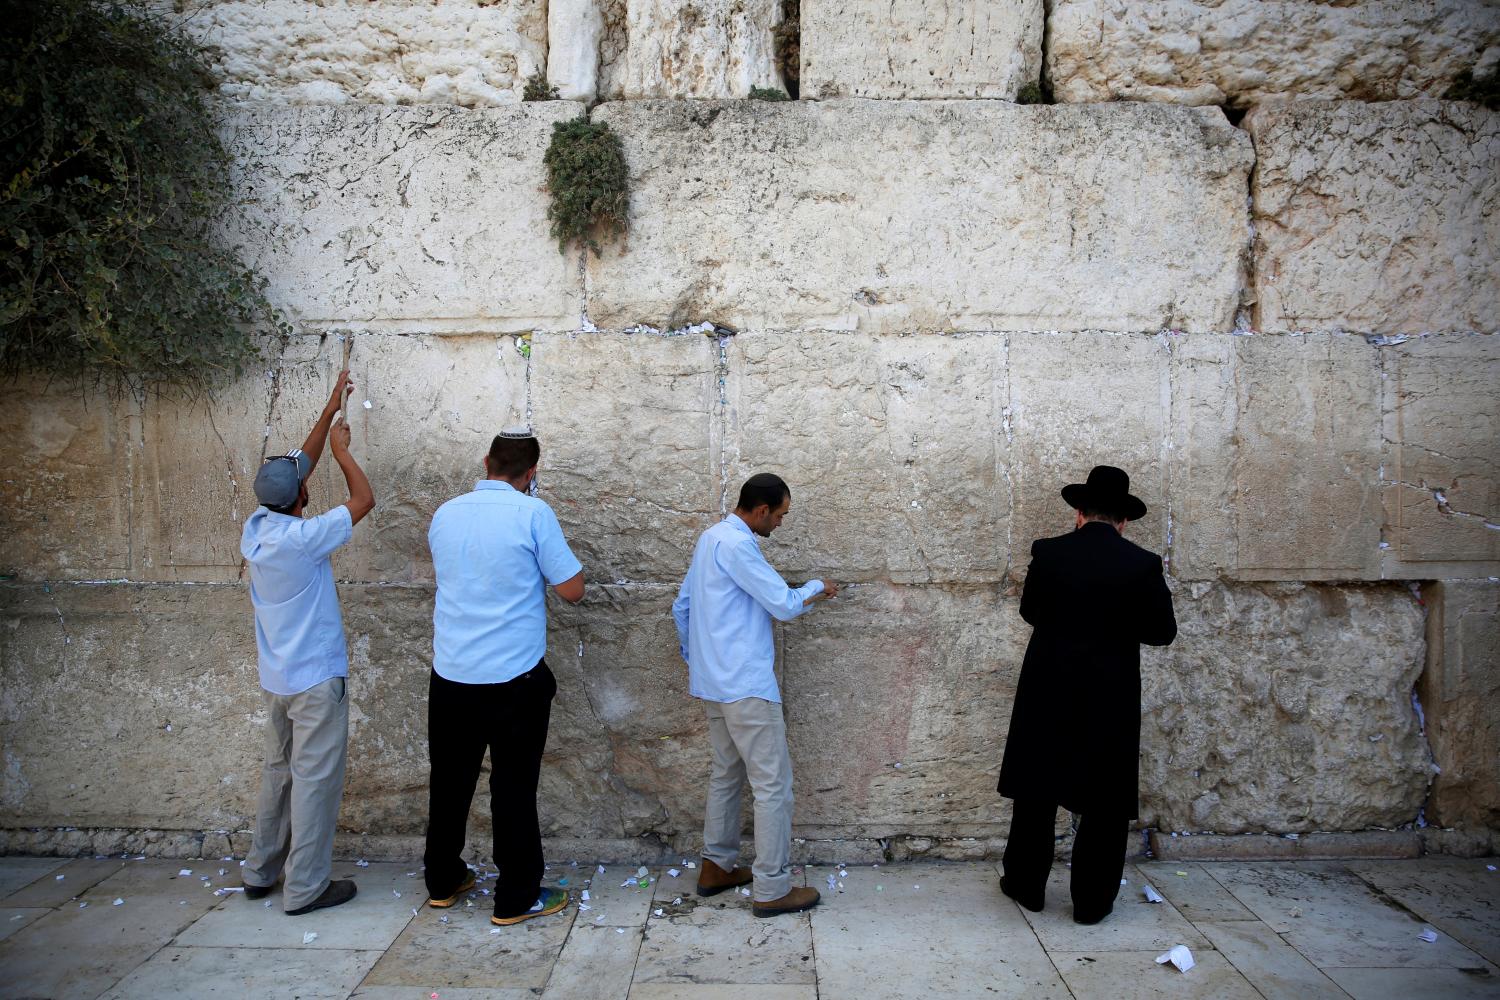 Men, including Western Wall Rabbi Shmuel Rabinowitz (R), clear notes placed in the cracks of the Western Wall, Judaism's holiest prayer site, to clear space for new notes ahead of the Jewish New Year, in Jerusalem's Old City September 27, 2016. REUTERS/Ronen Zvulun - RTSPMZT